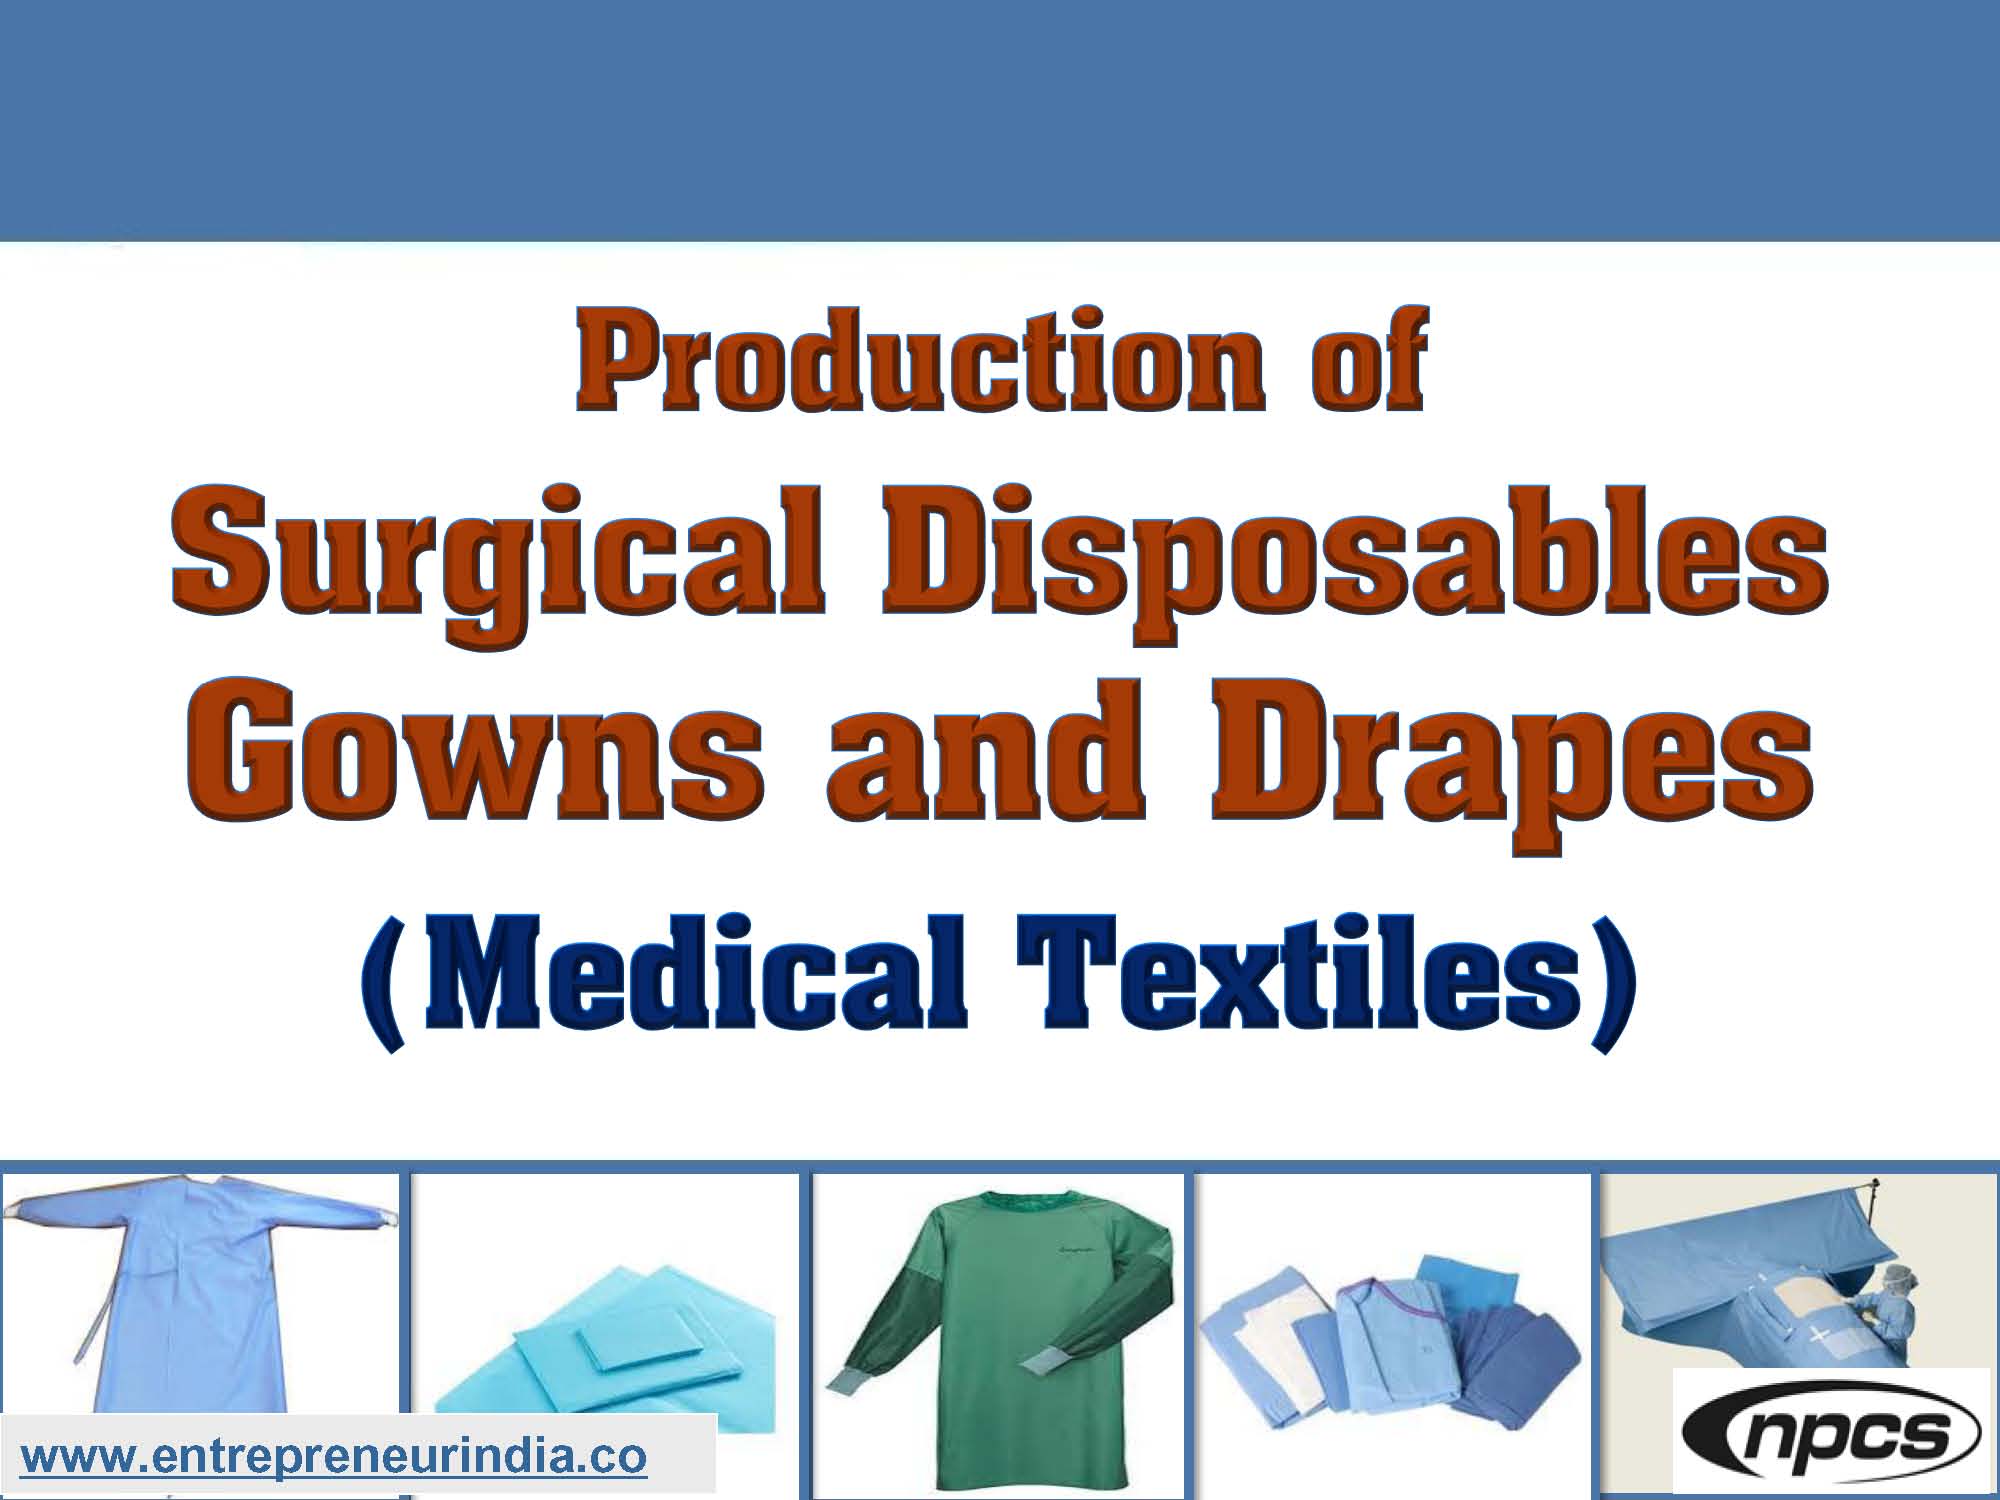 Production of Surgical Disposables Gowns and Drapes (Medical Textiles)..jpg